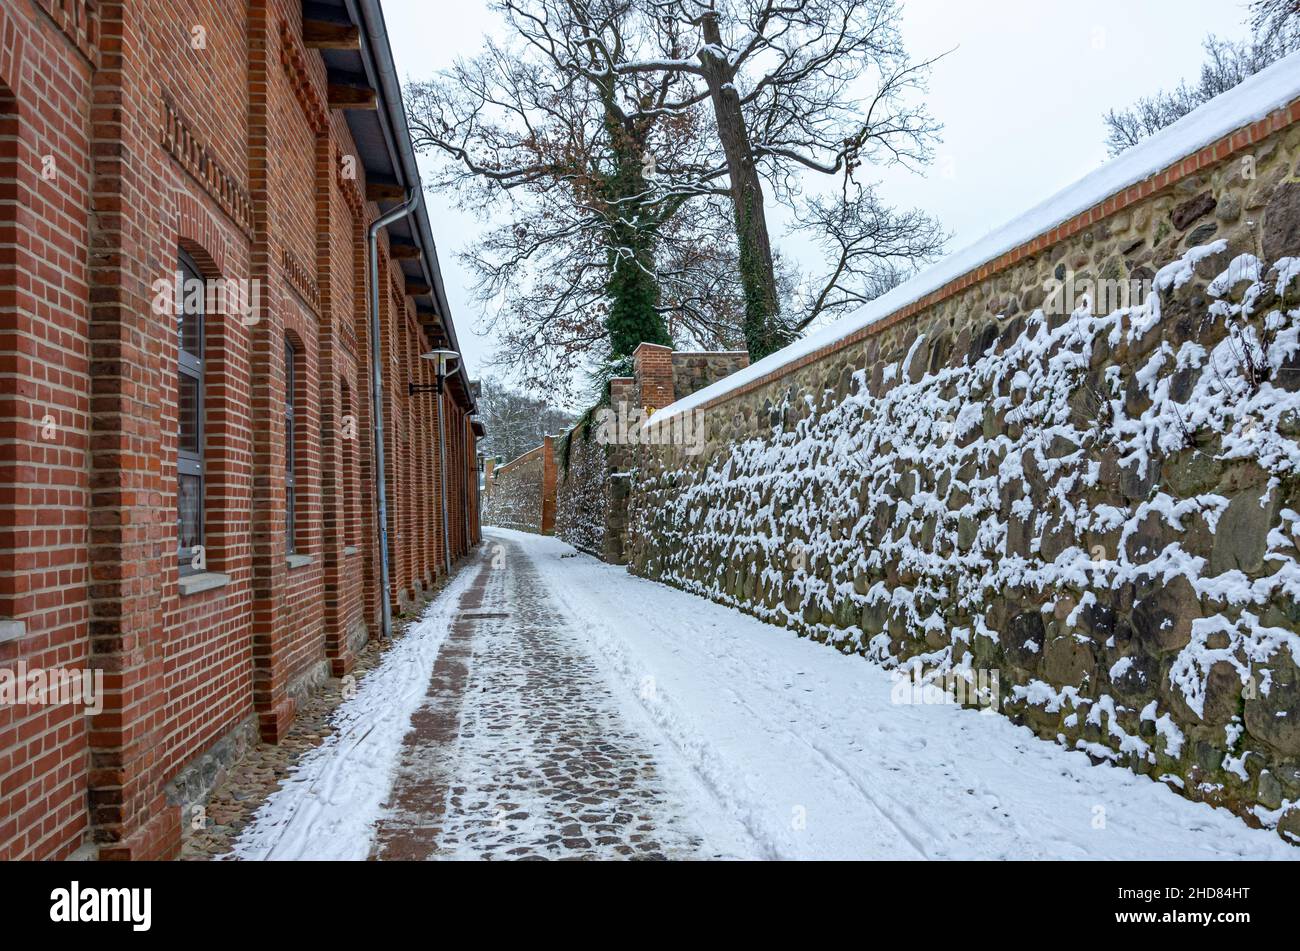 Neubrandenburg, Mecklenburg-Western Pomerania, Germany: Winter impressions on Ring Route between historic architecture and the medieval town wall. Stock Photo